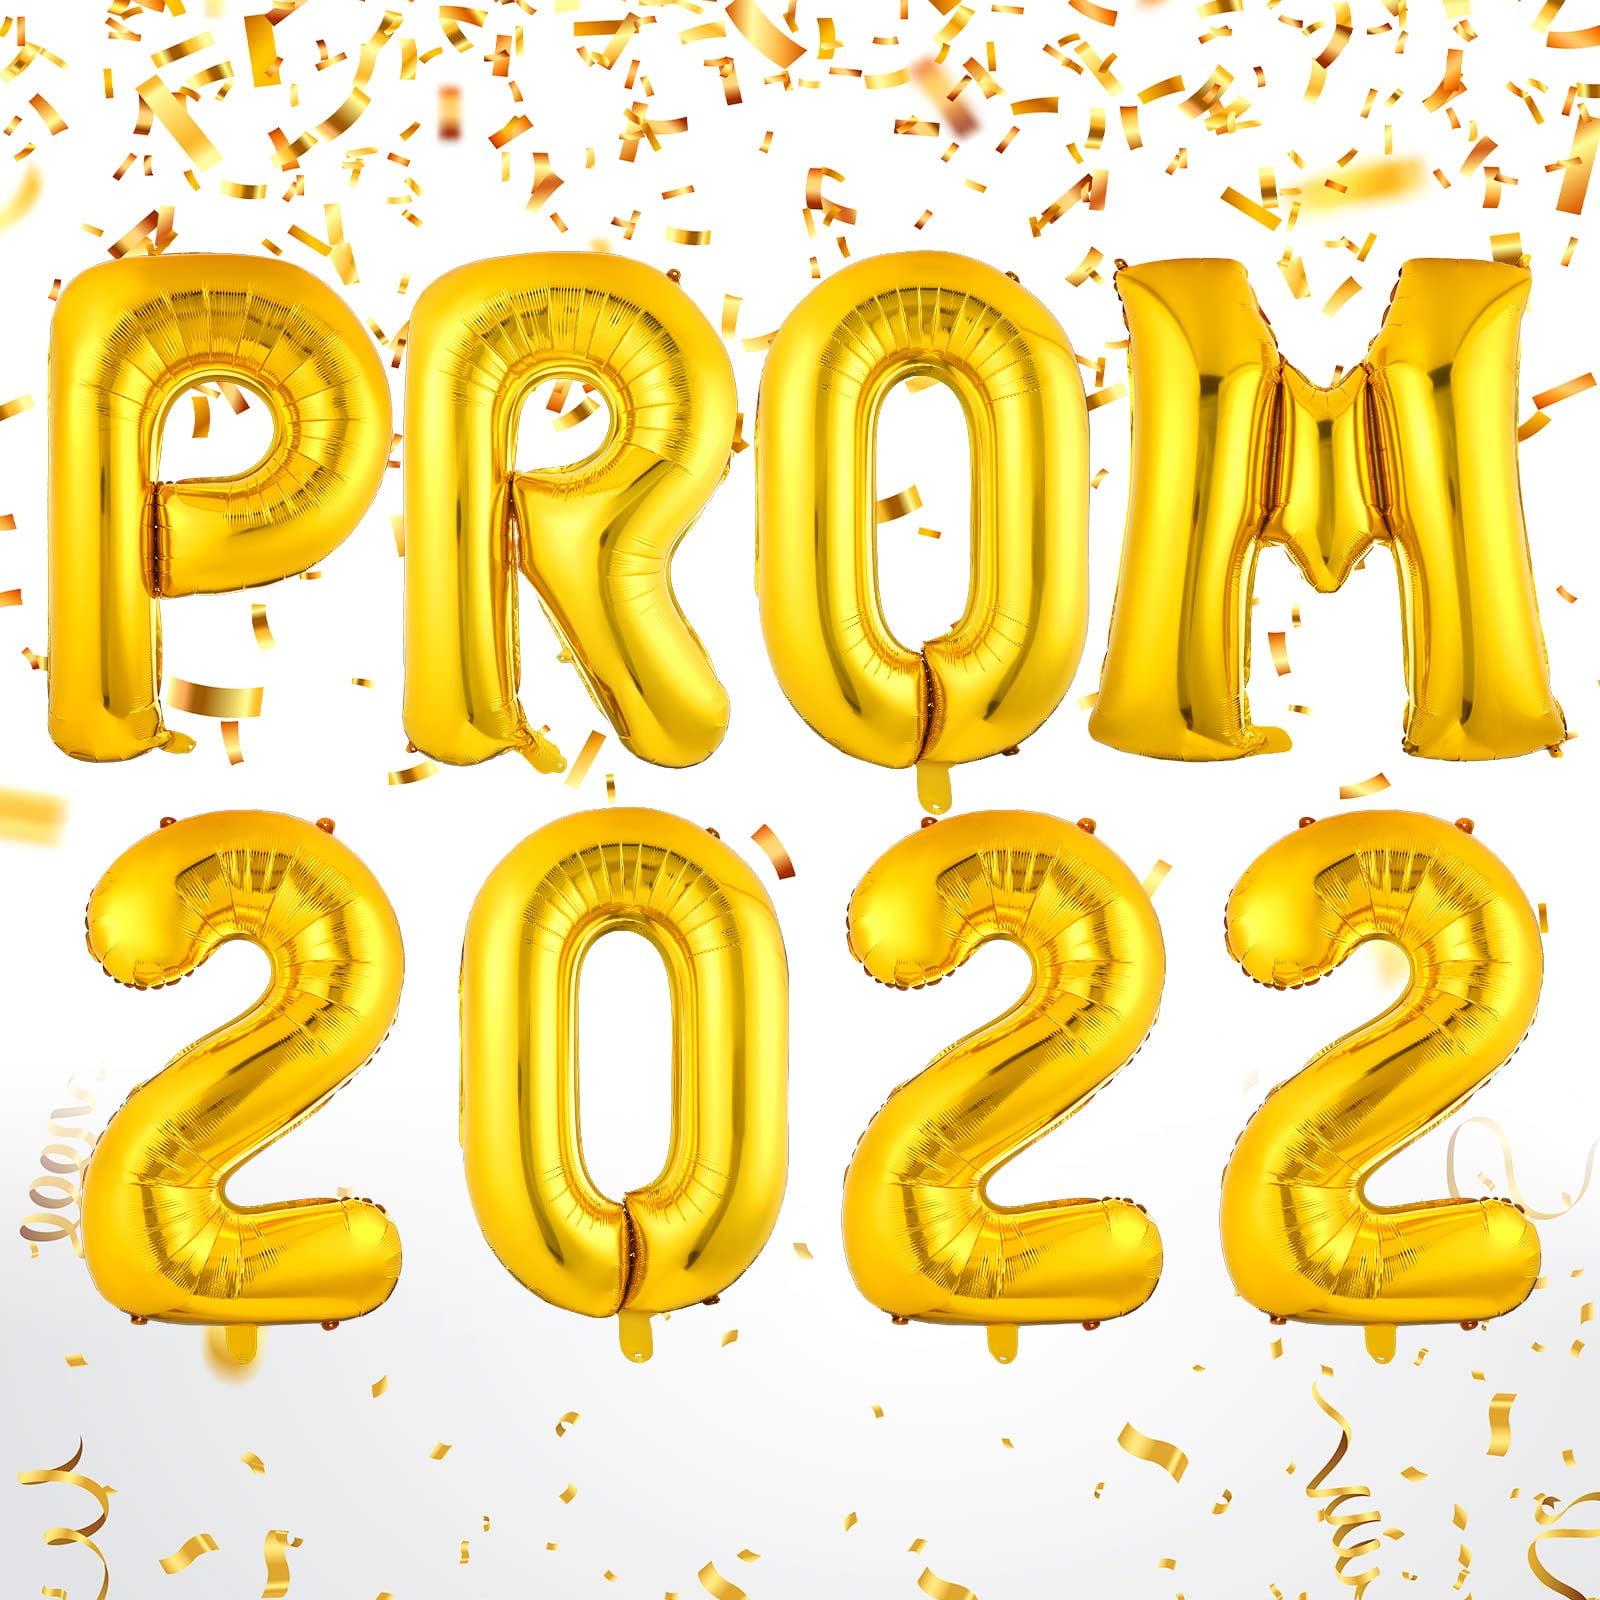 8 Pieces Prom 2022 Balloons Banner 32 Inch Letter Balloons Foil